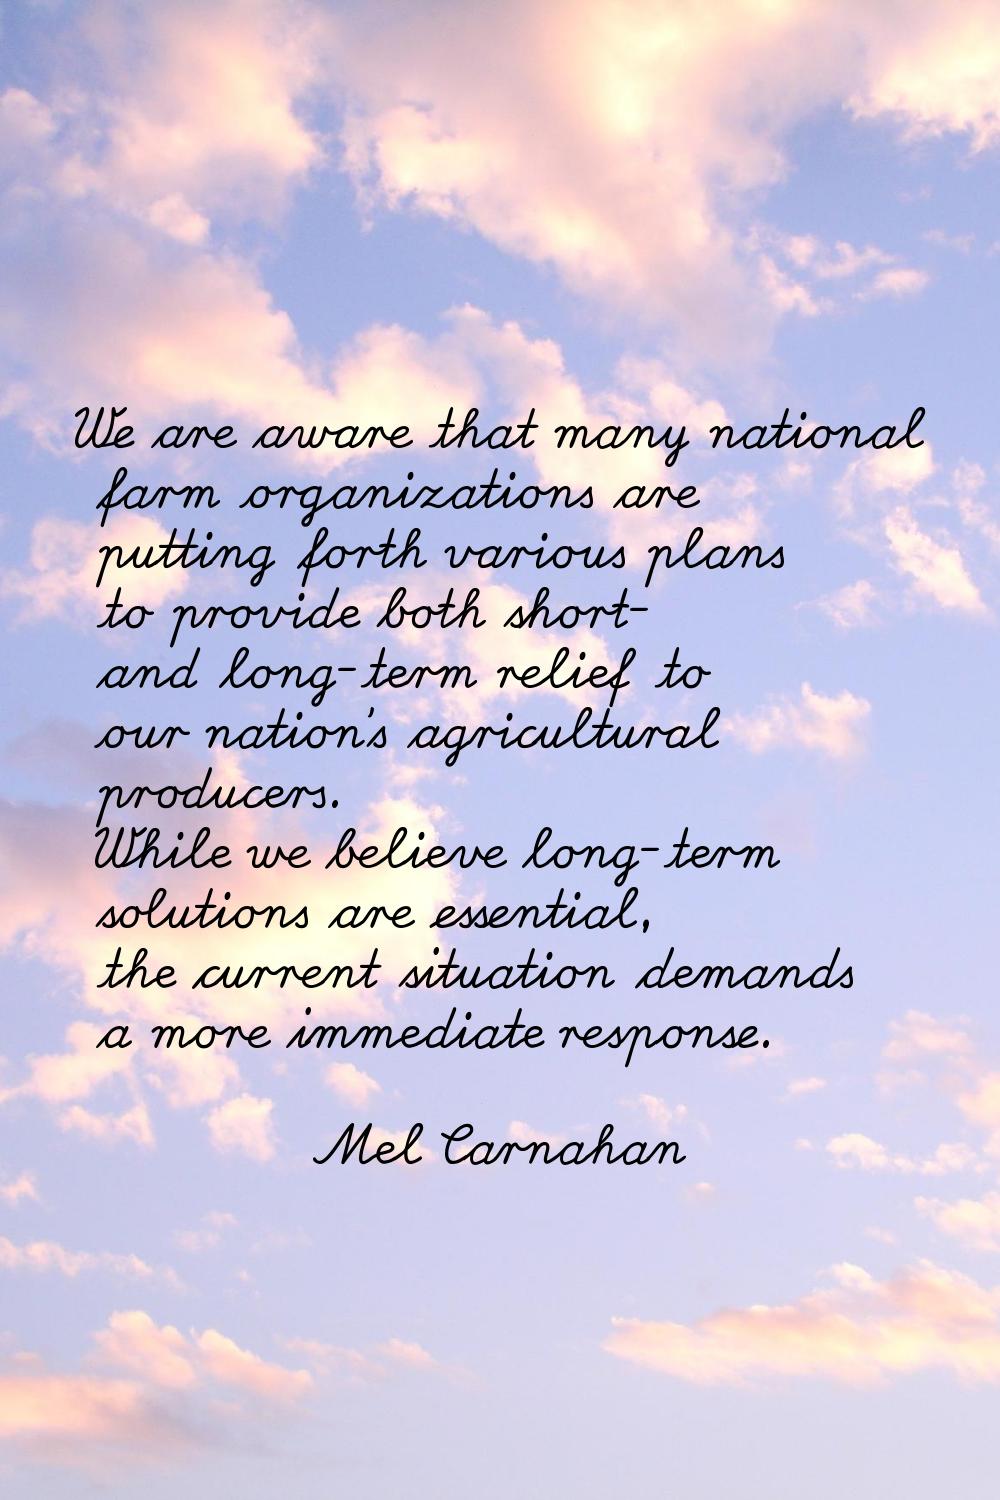 We are aware that many national farm organizations are putting forth various plans to provide both 